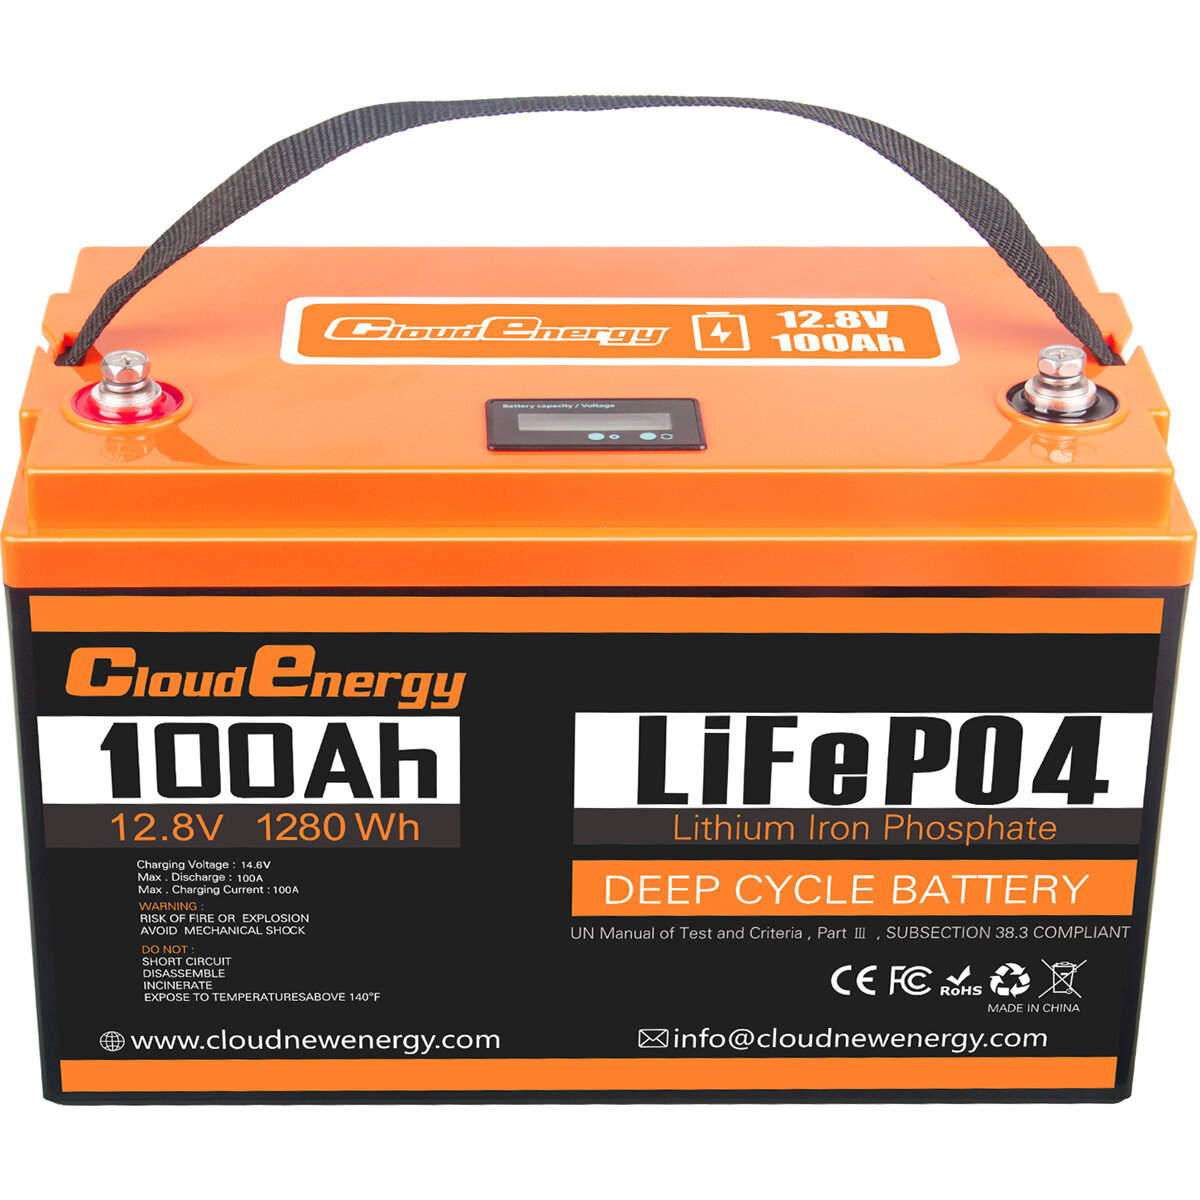 [EU Direct] Cloudenergy 12V 100Ah LiFePO4 Lithium Battery Pack Backup Power 1280Wh Energy 6000+ Deep Cycles Built-in 100A BMS Support in Series Parallel for Replacing Most of Backup Power RV Boats Solar Trolling Motor Off-Grid, CL12-100